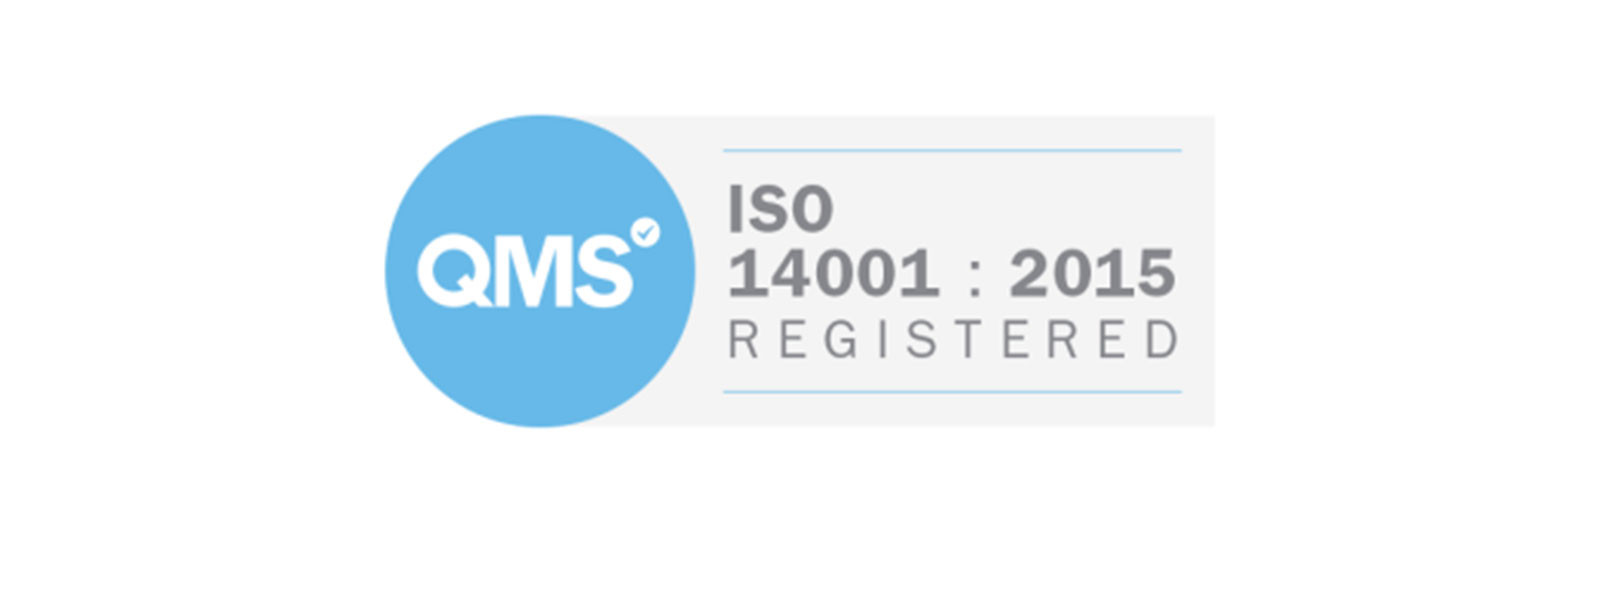 Direct Air awarded ISO 14001:2015 certification